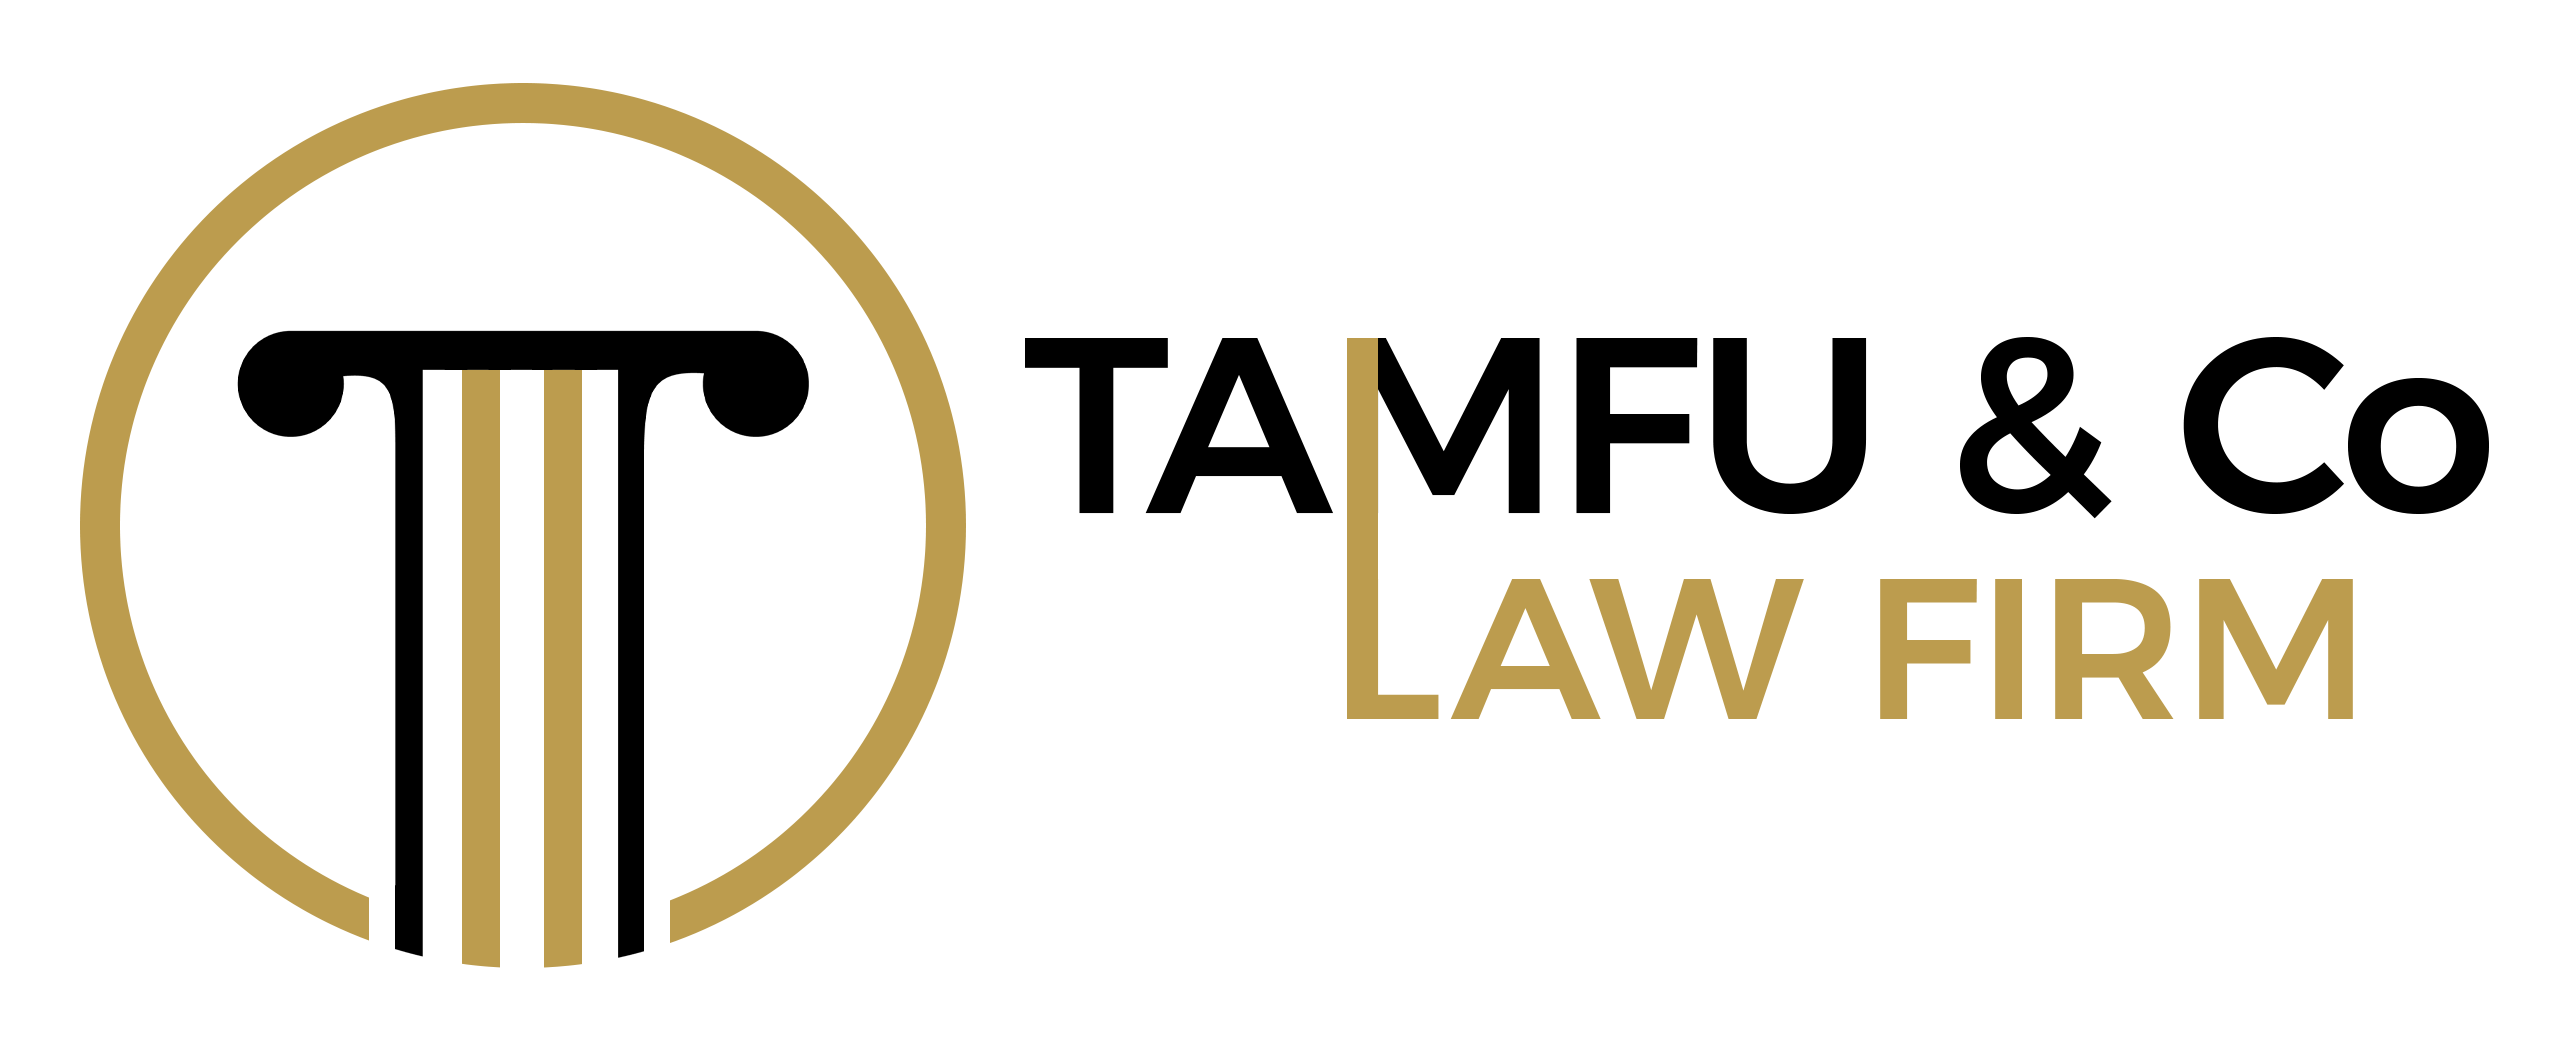 TAMFU & Co LAW FIRM